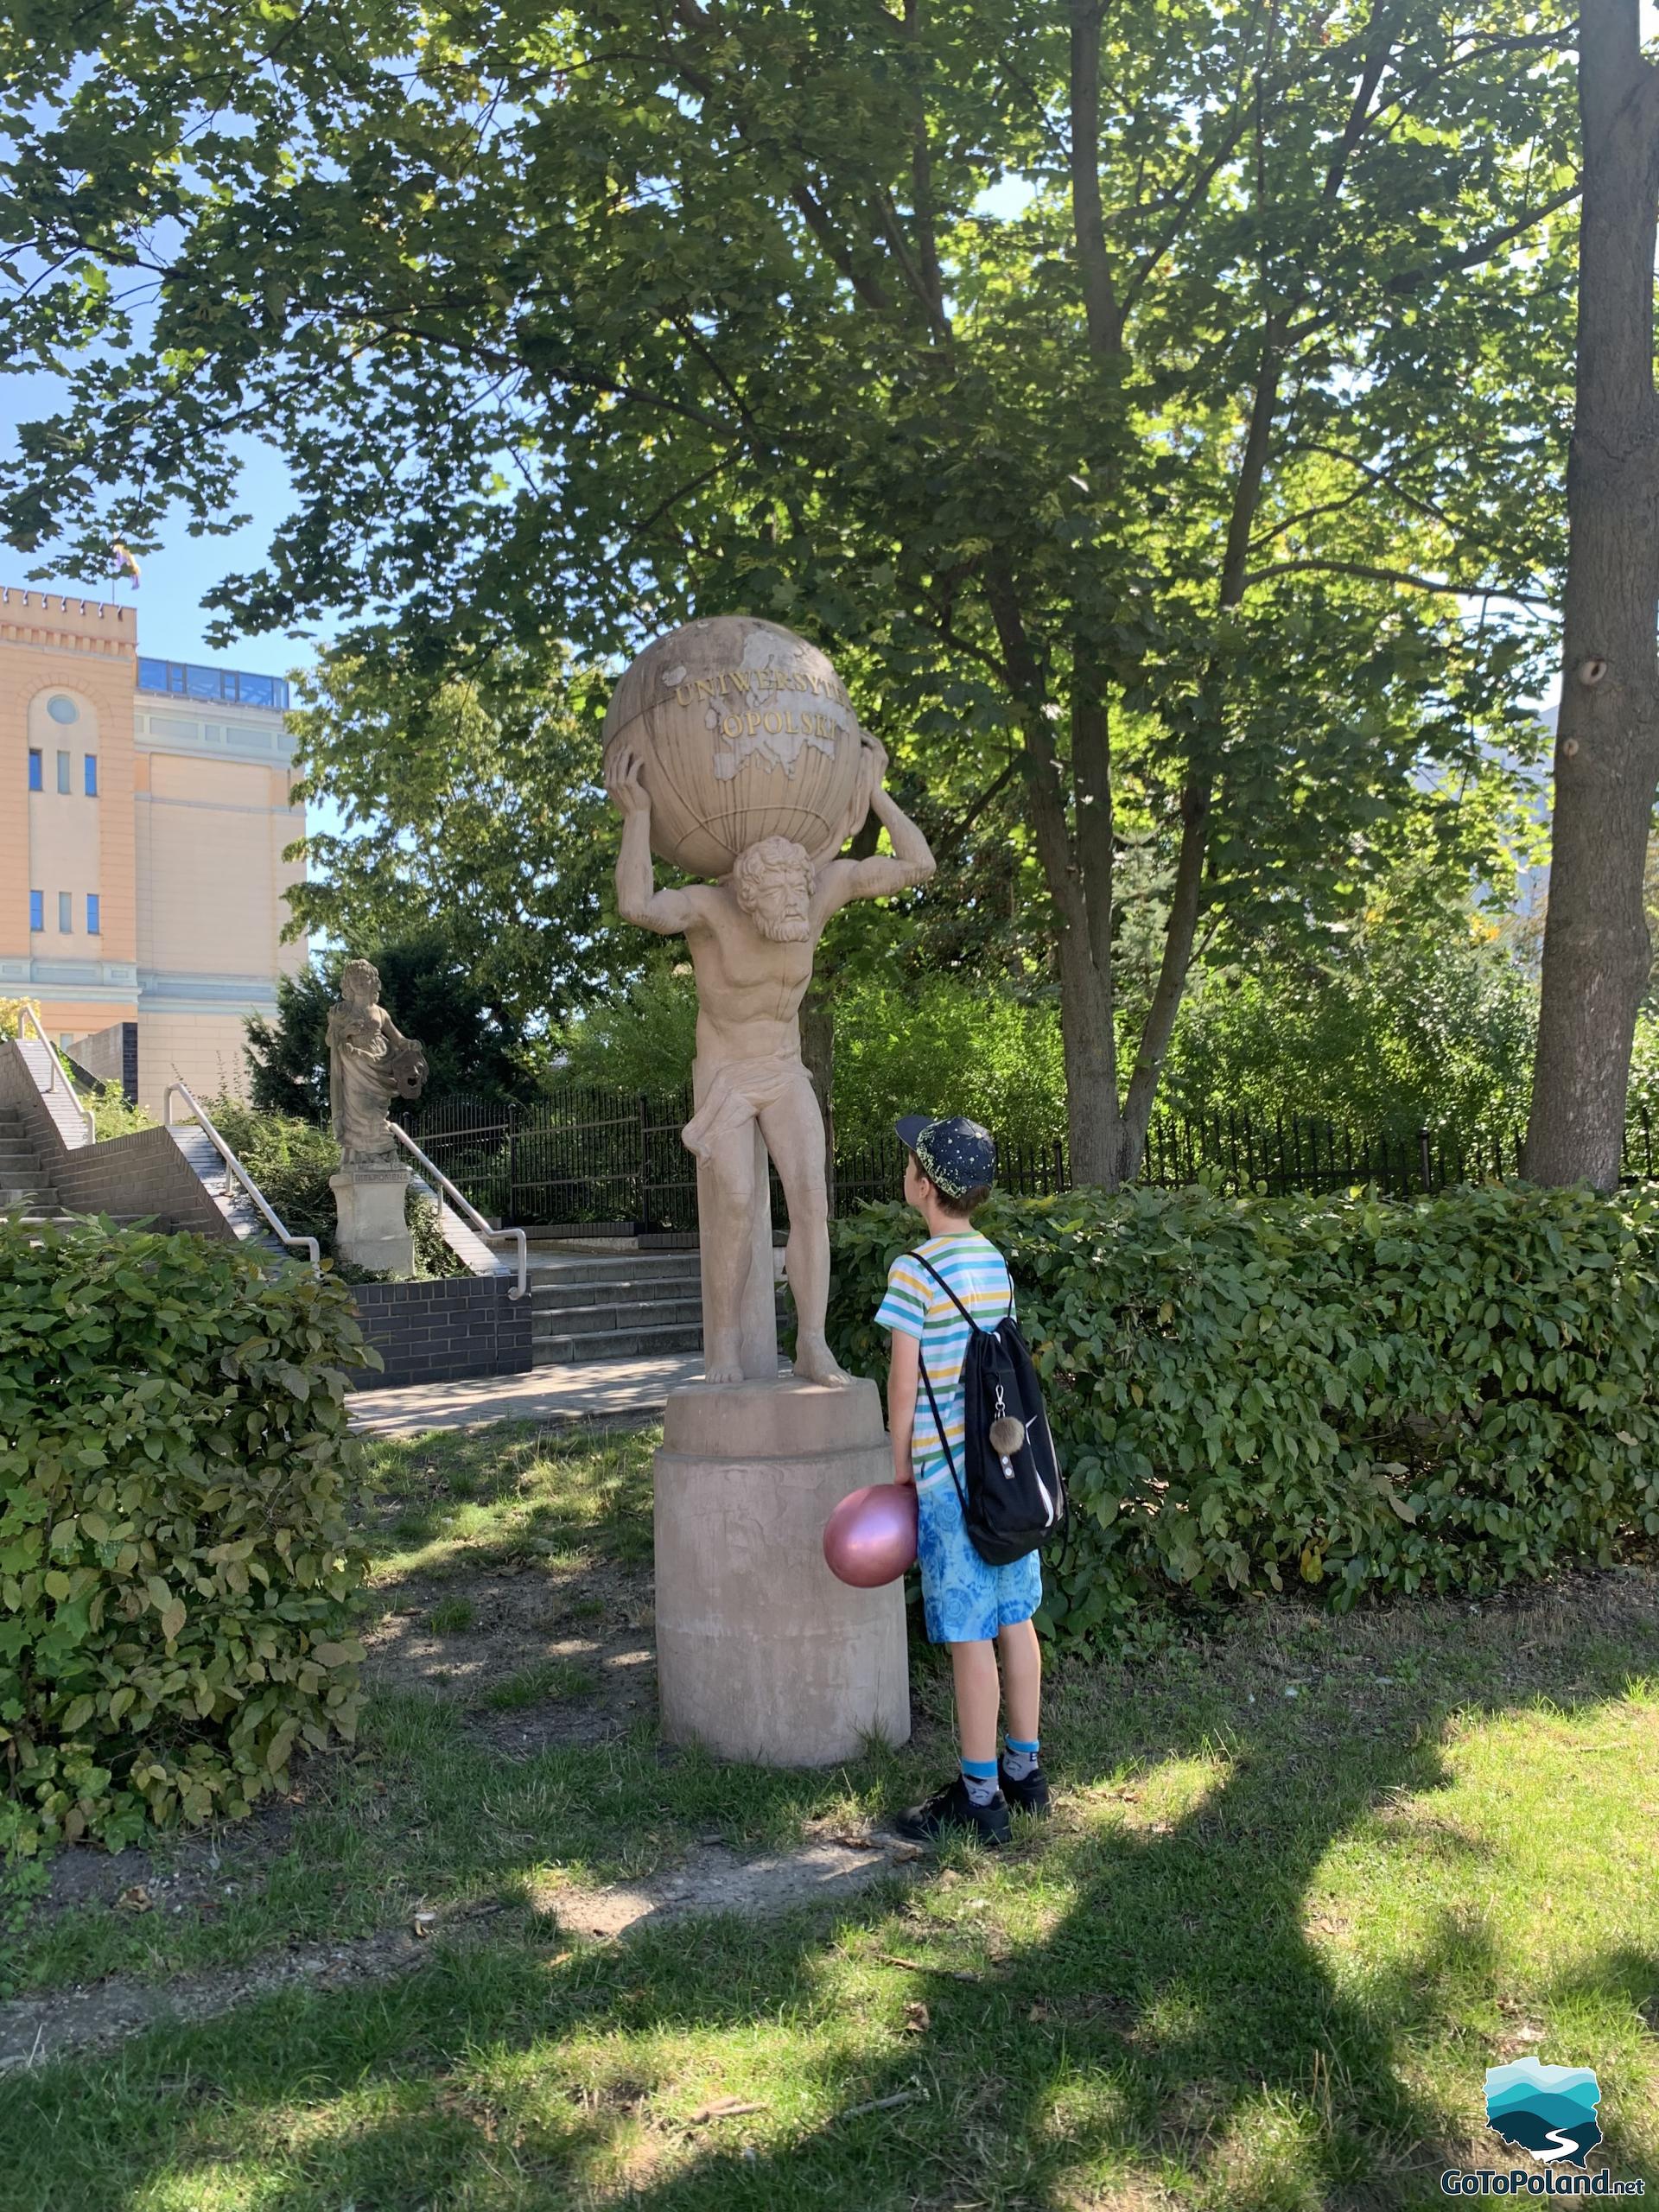 the boy looking at the atlas, which has the inscription University of Opole